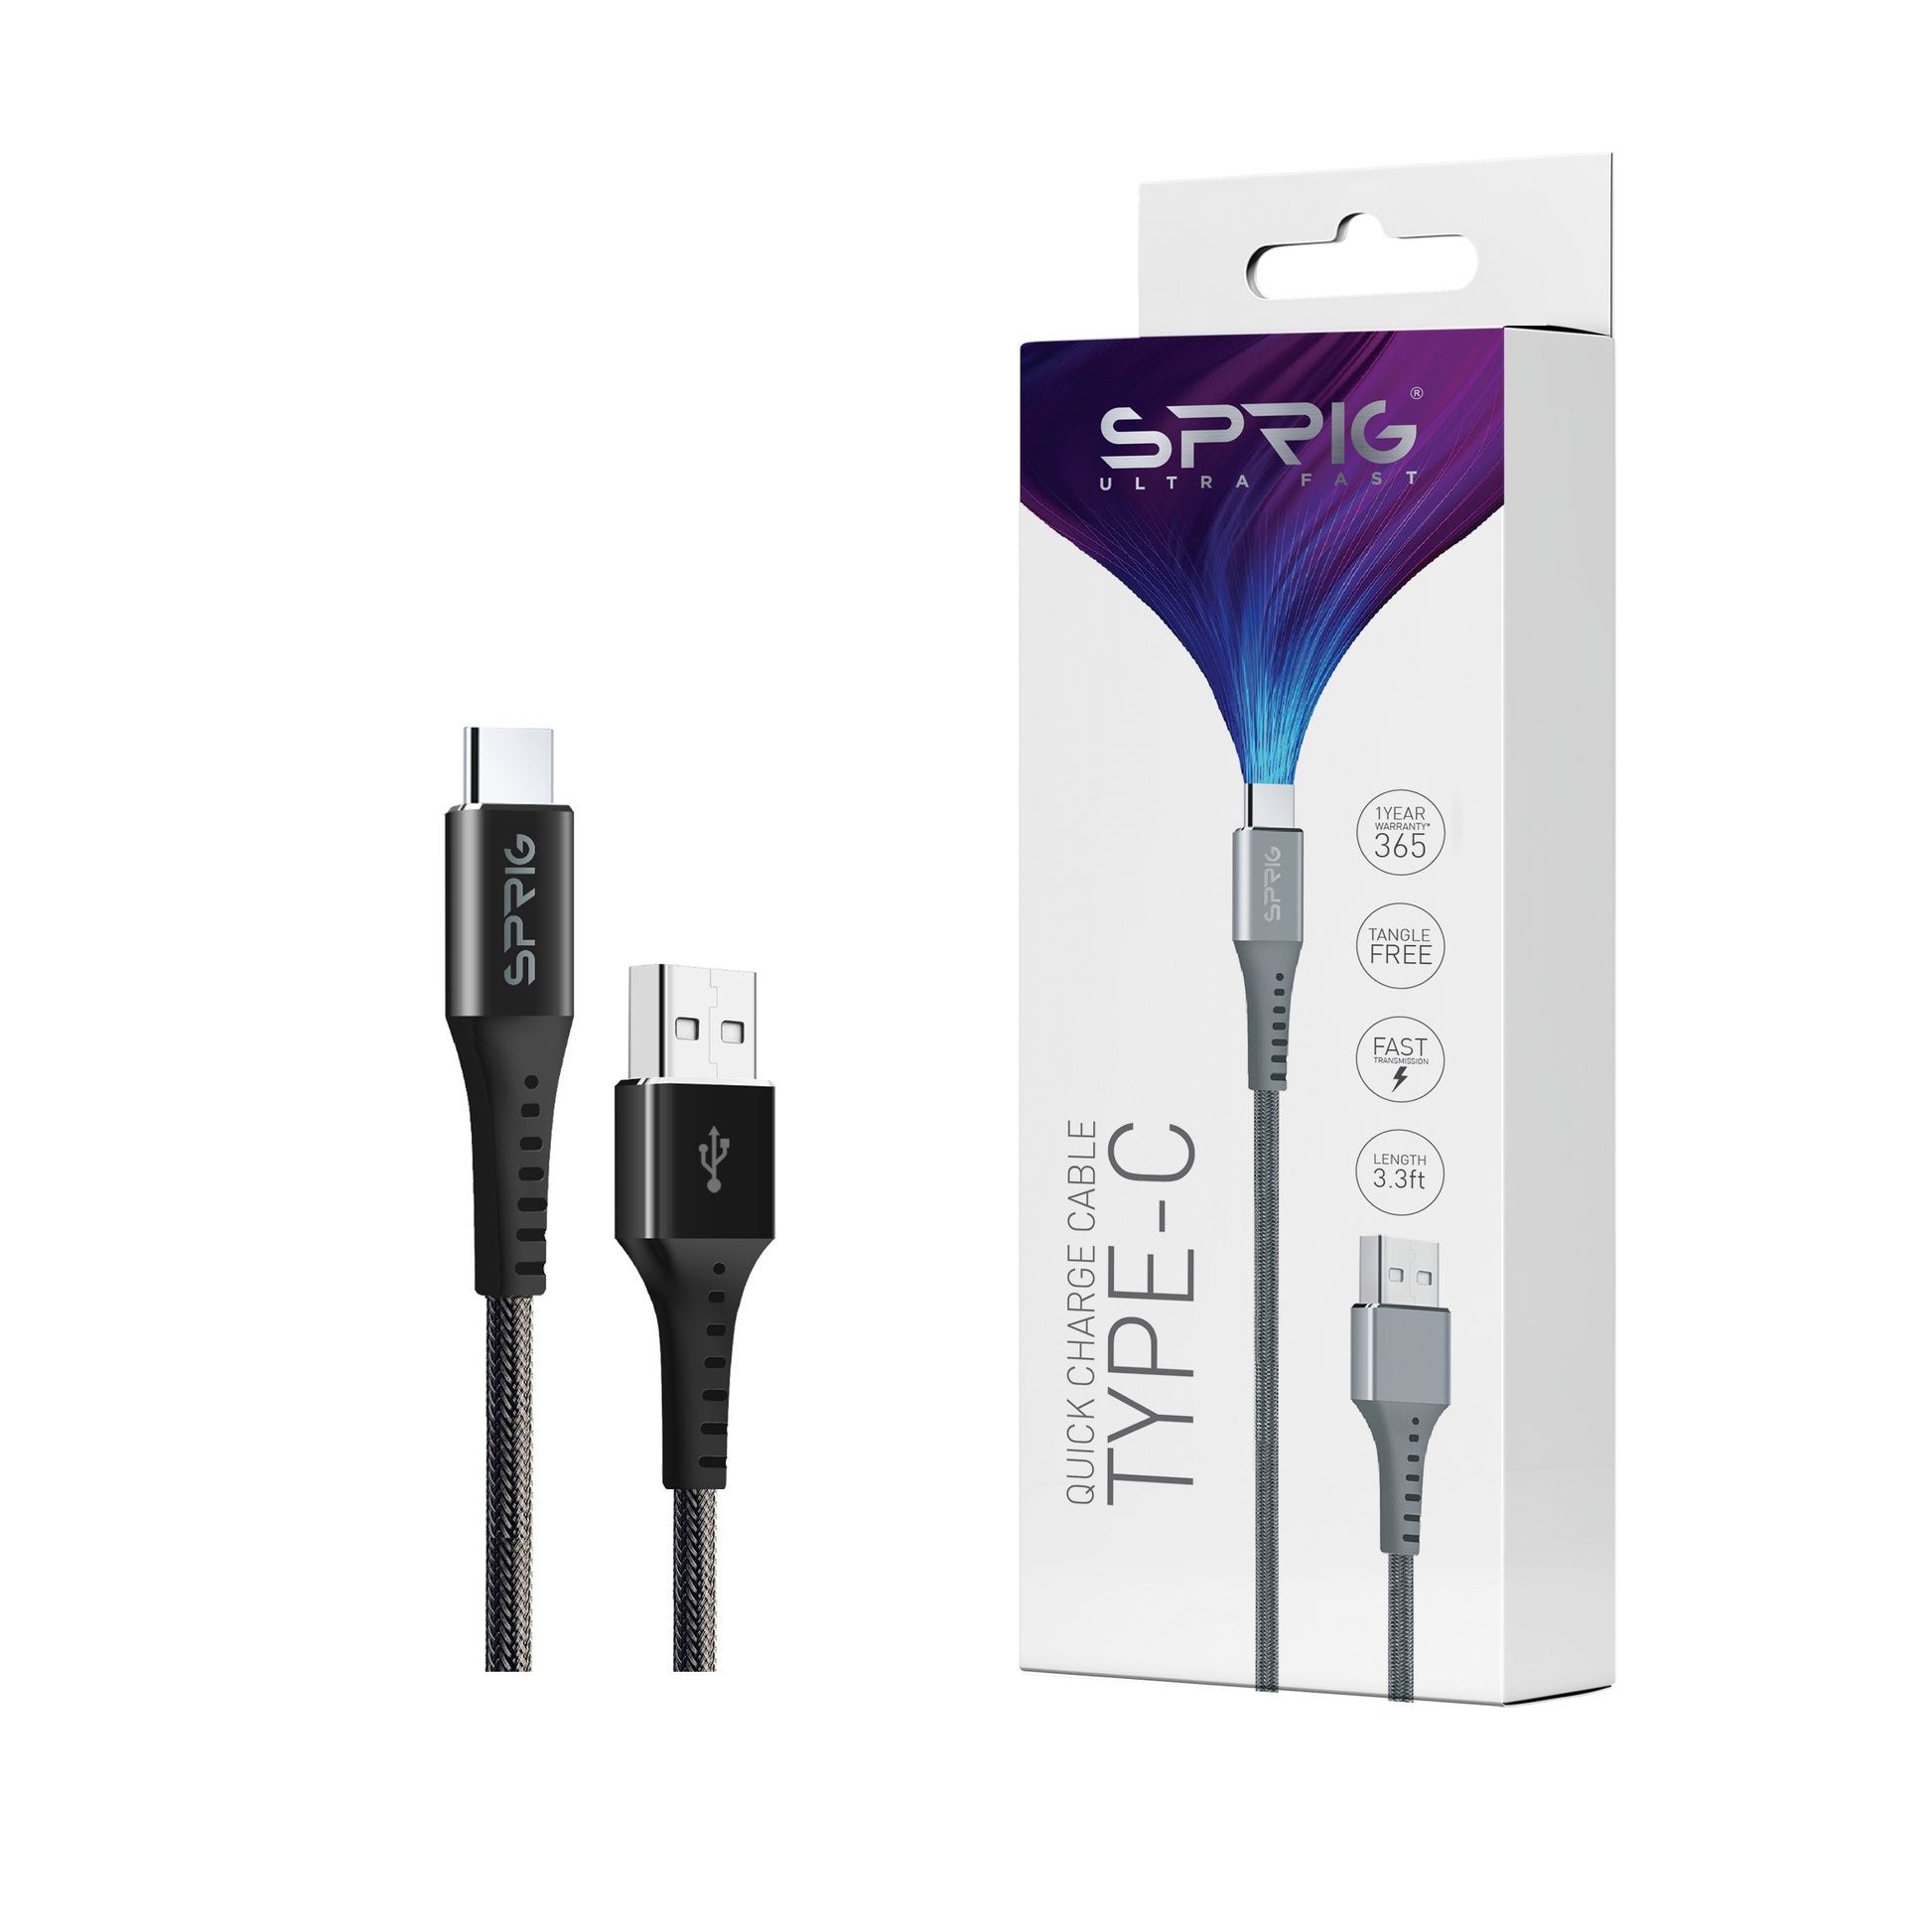 C-Type Charging Cable by Sprig